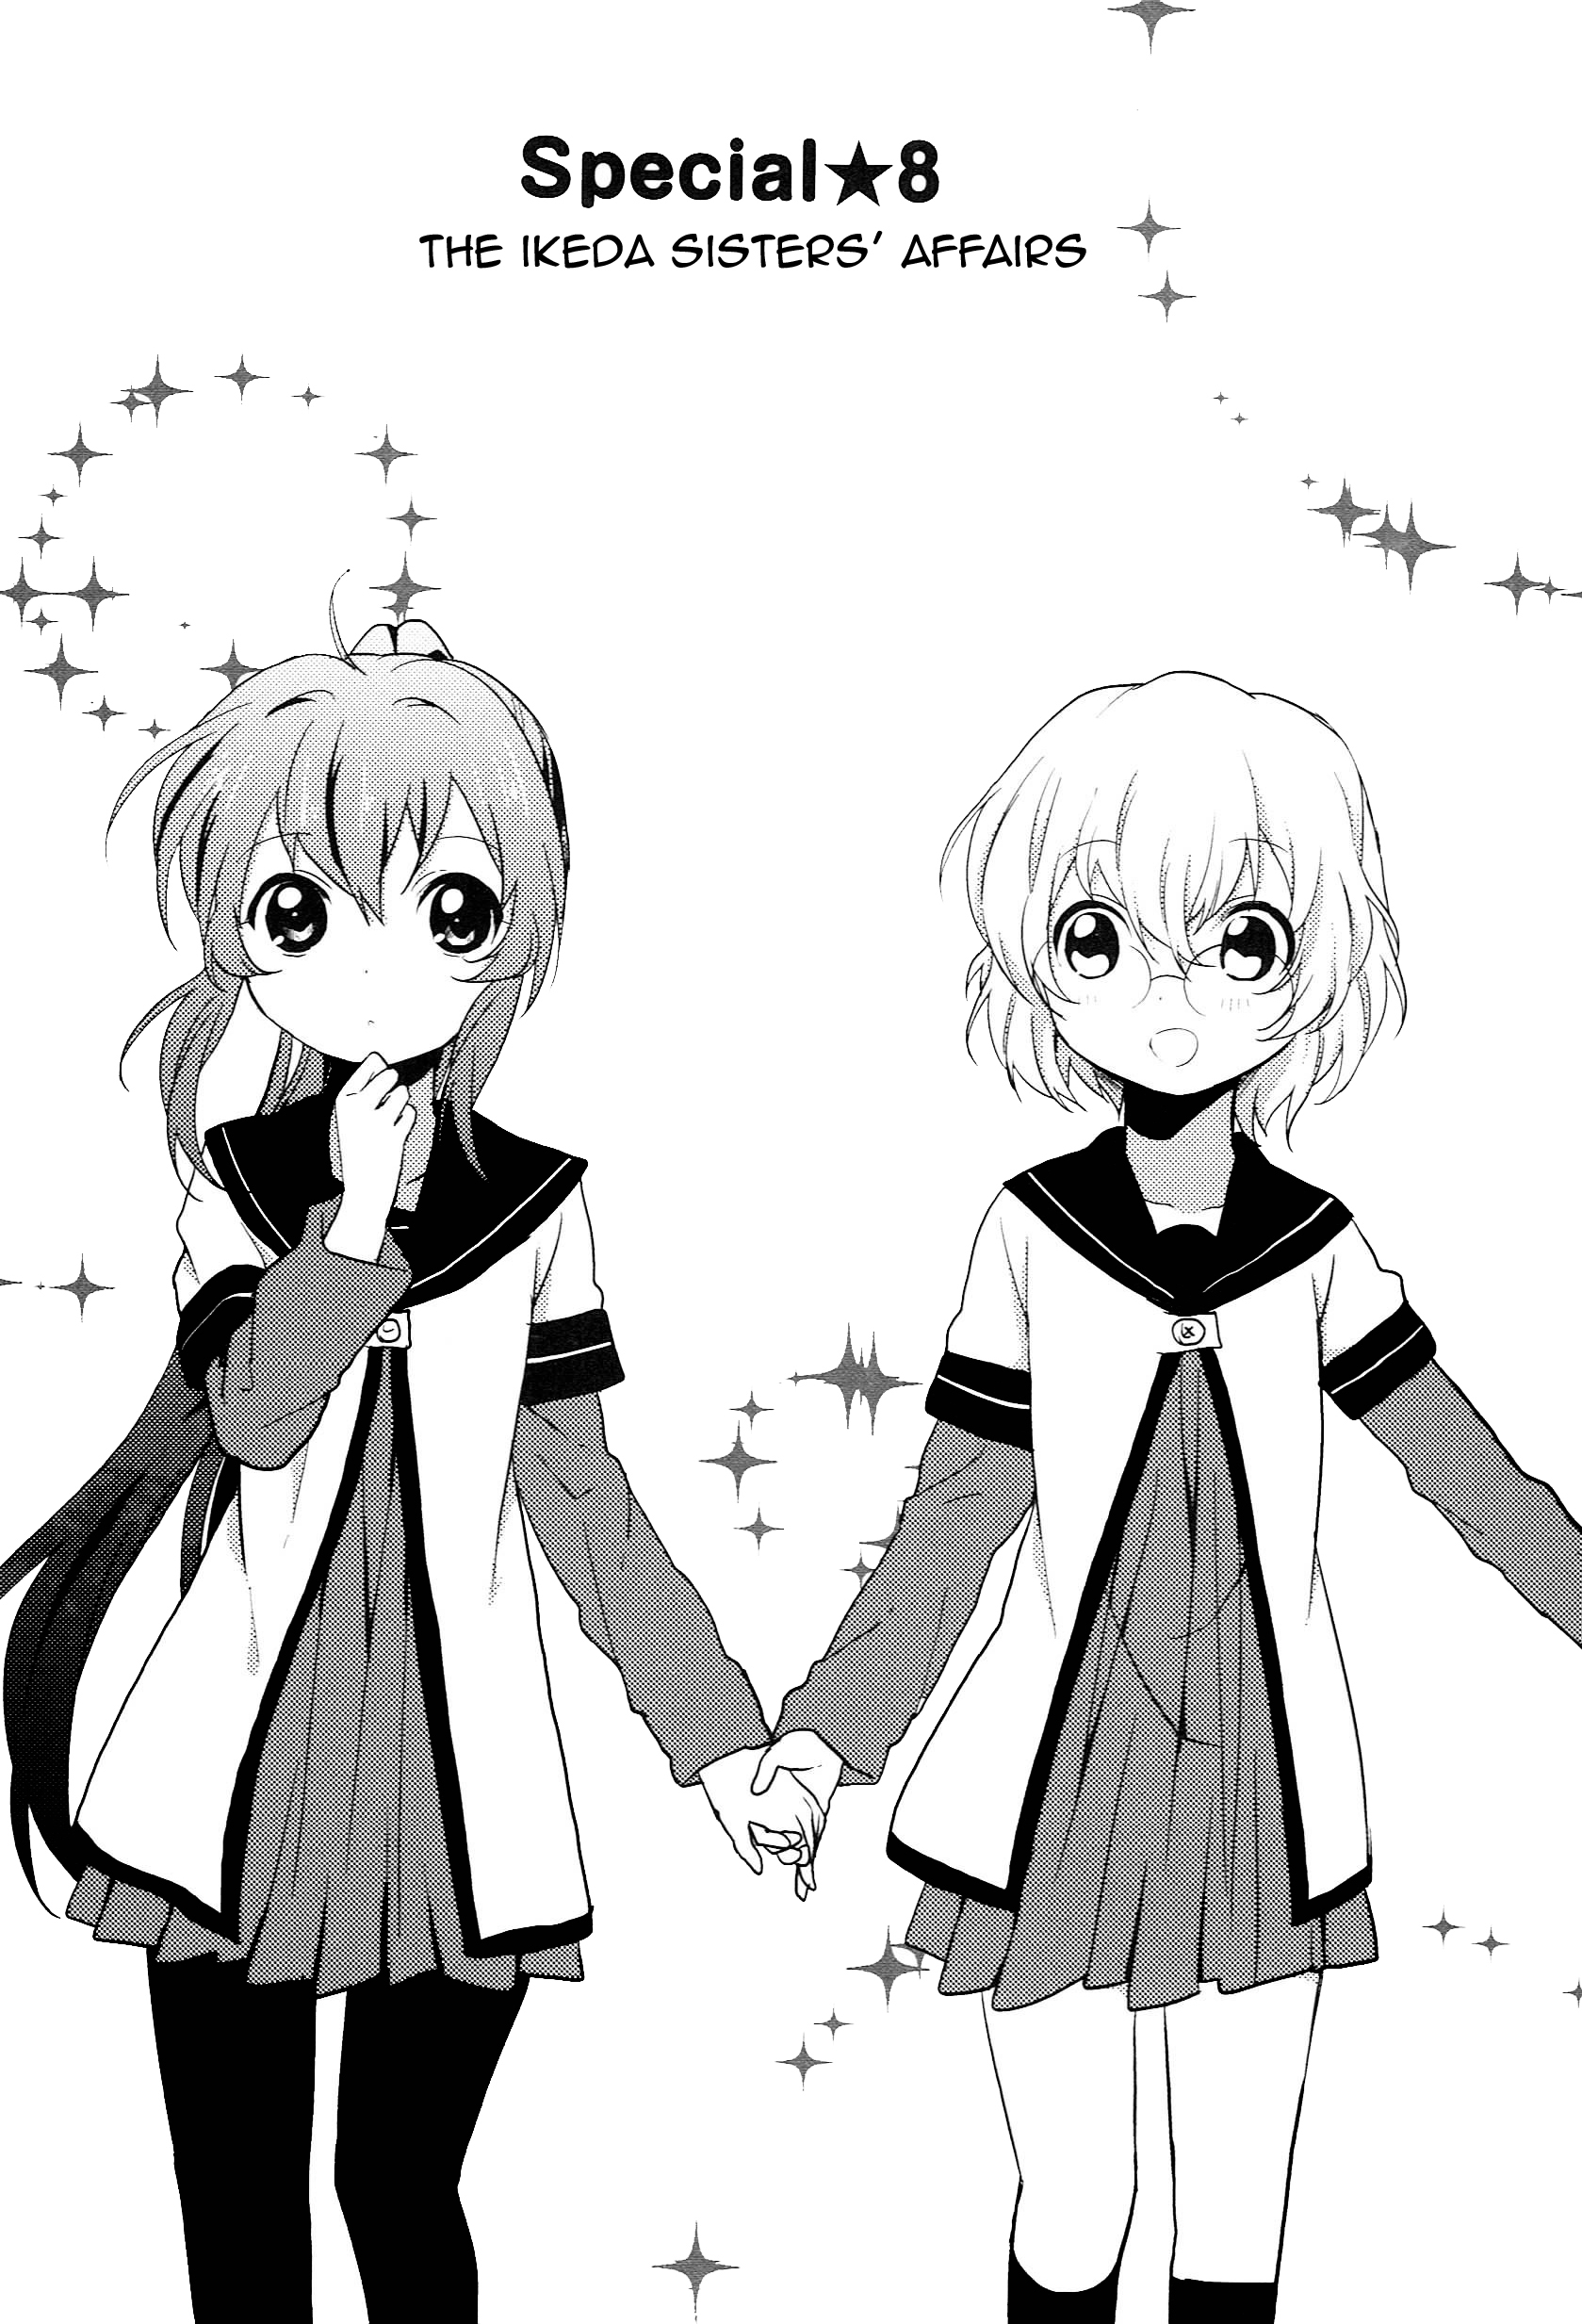 Yuru Yuri Vol.6 Chapter 51.10: Special 8 - The Ikeda Sisters' Affairs - Picture 1